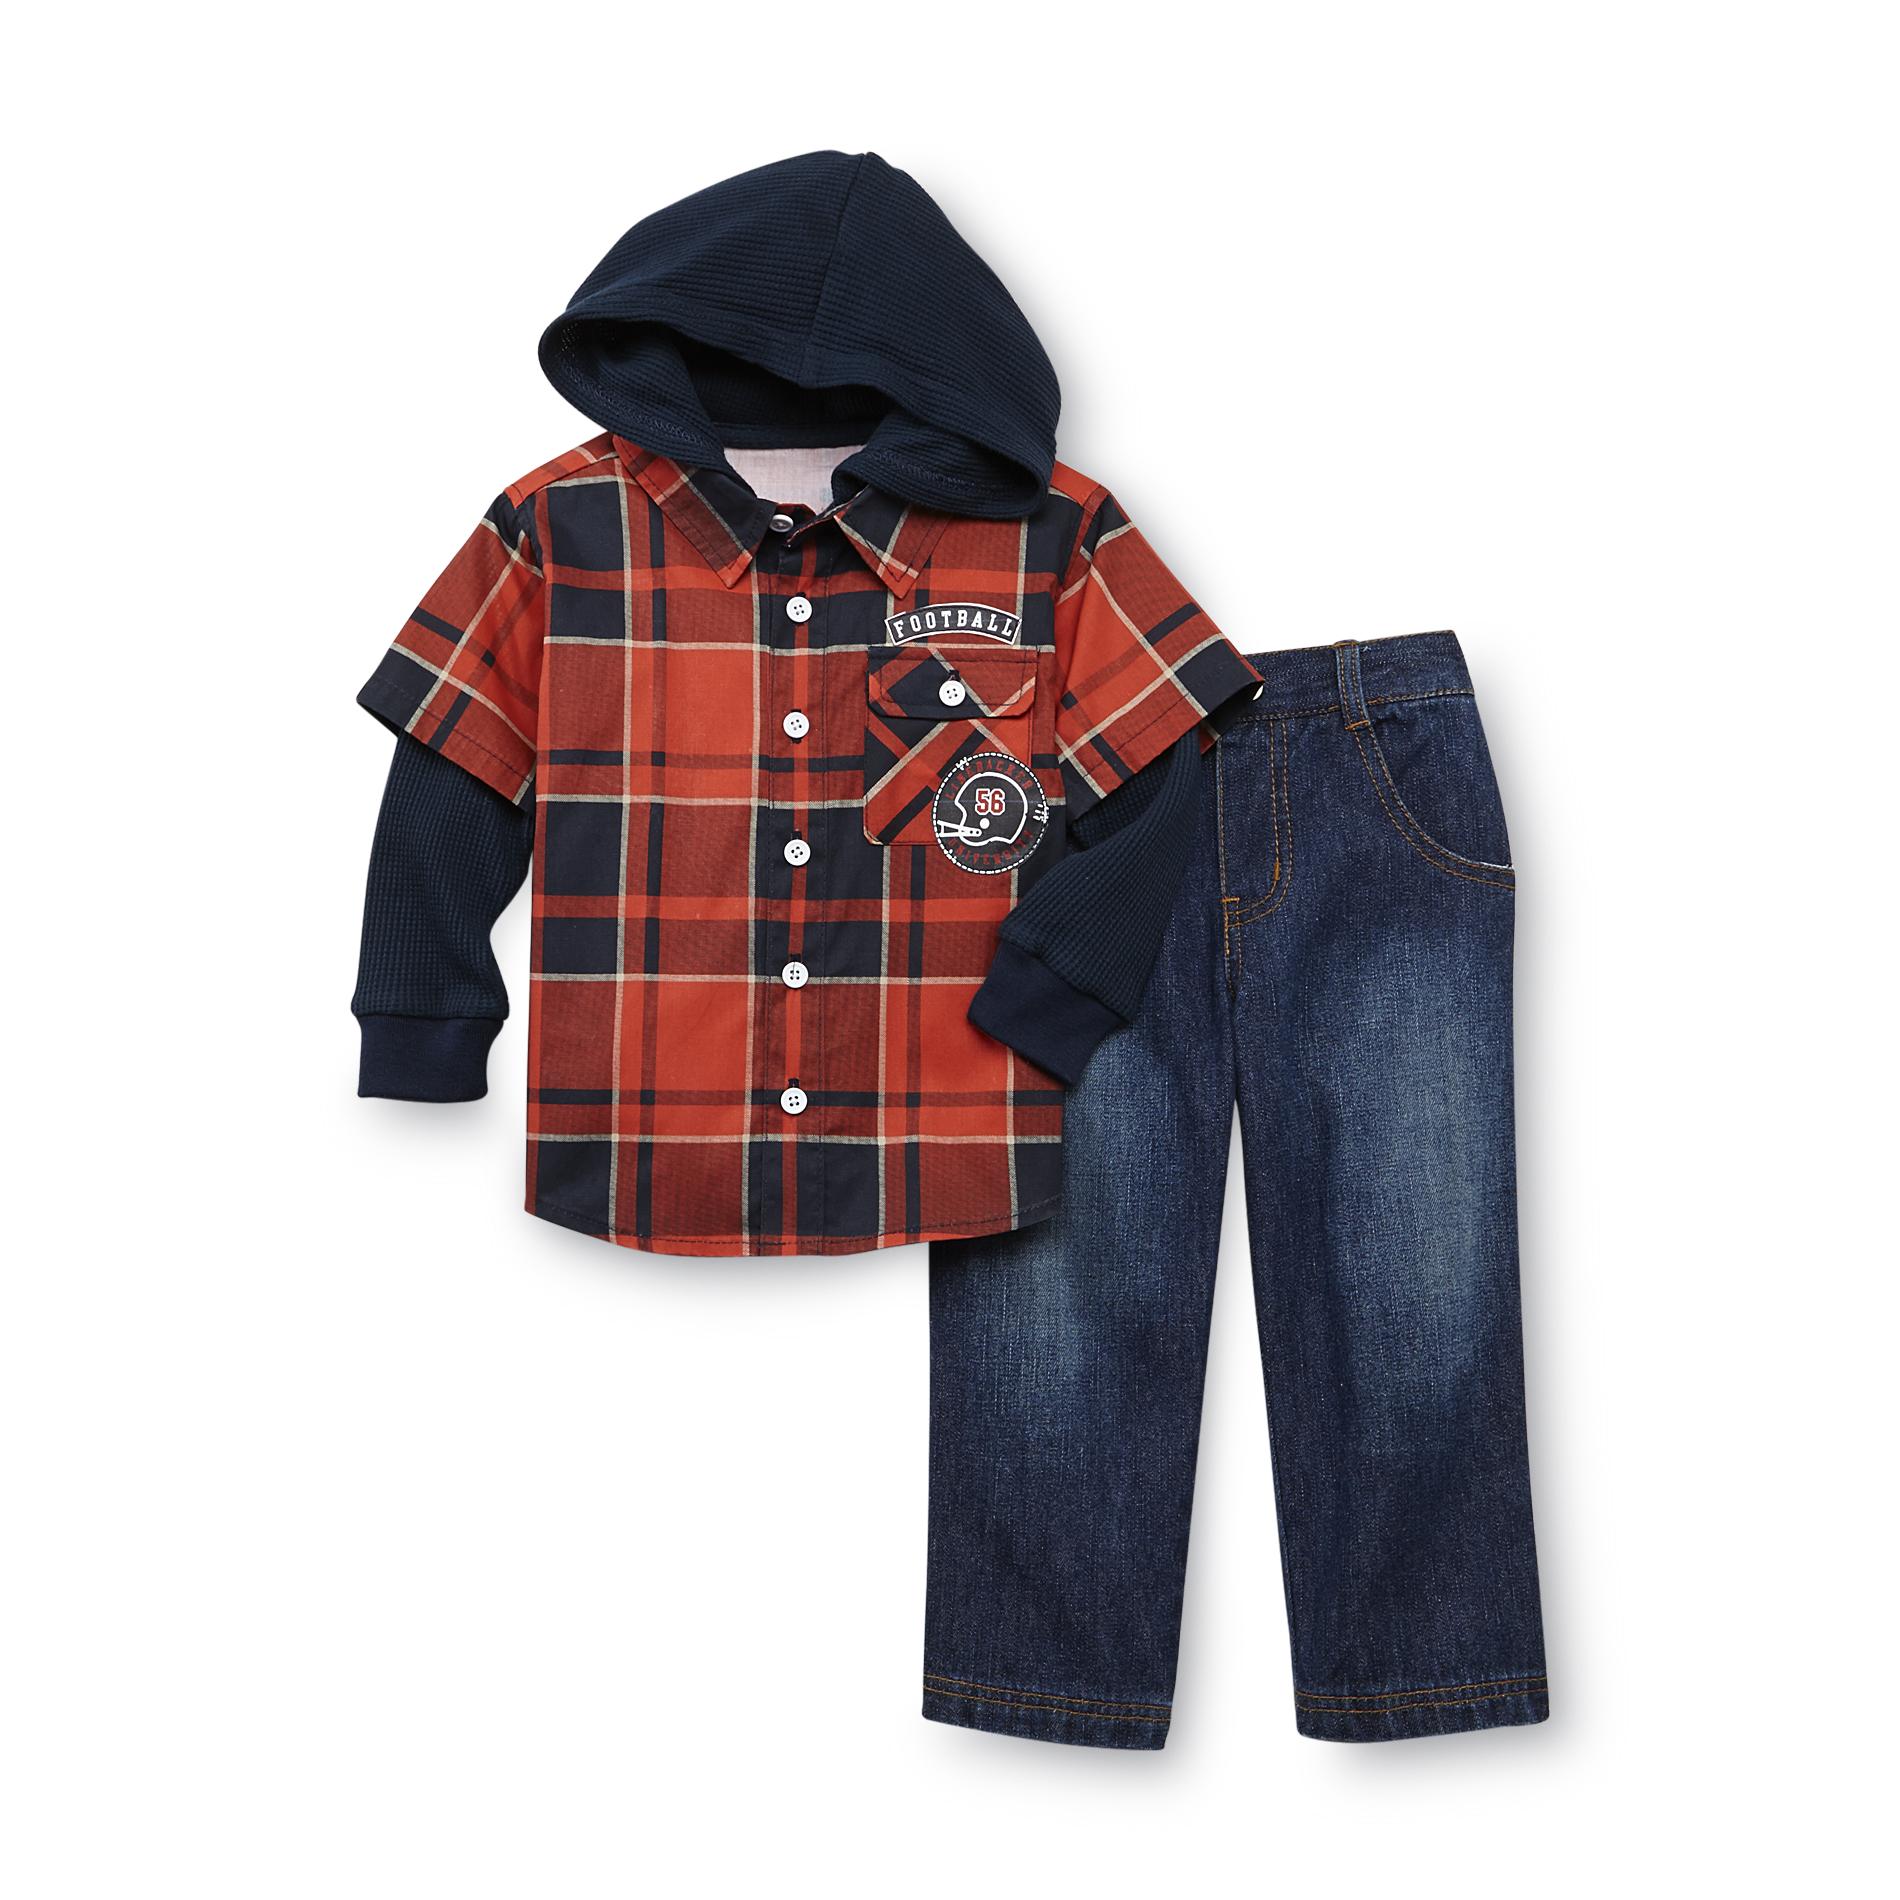 Little Rebels Infant & Toddler Boy's Layered-Look Shirt & Jeans - Sports